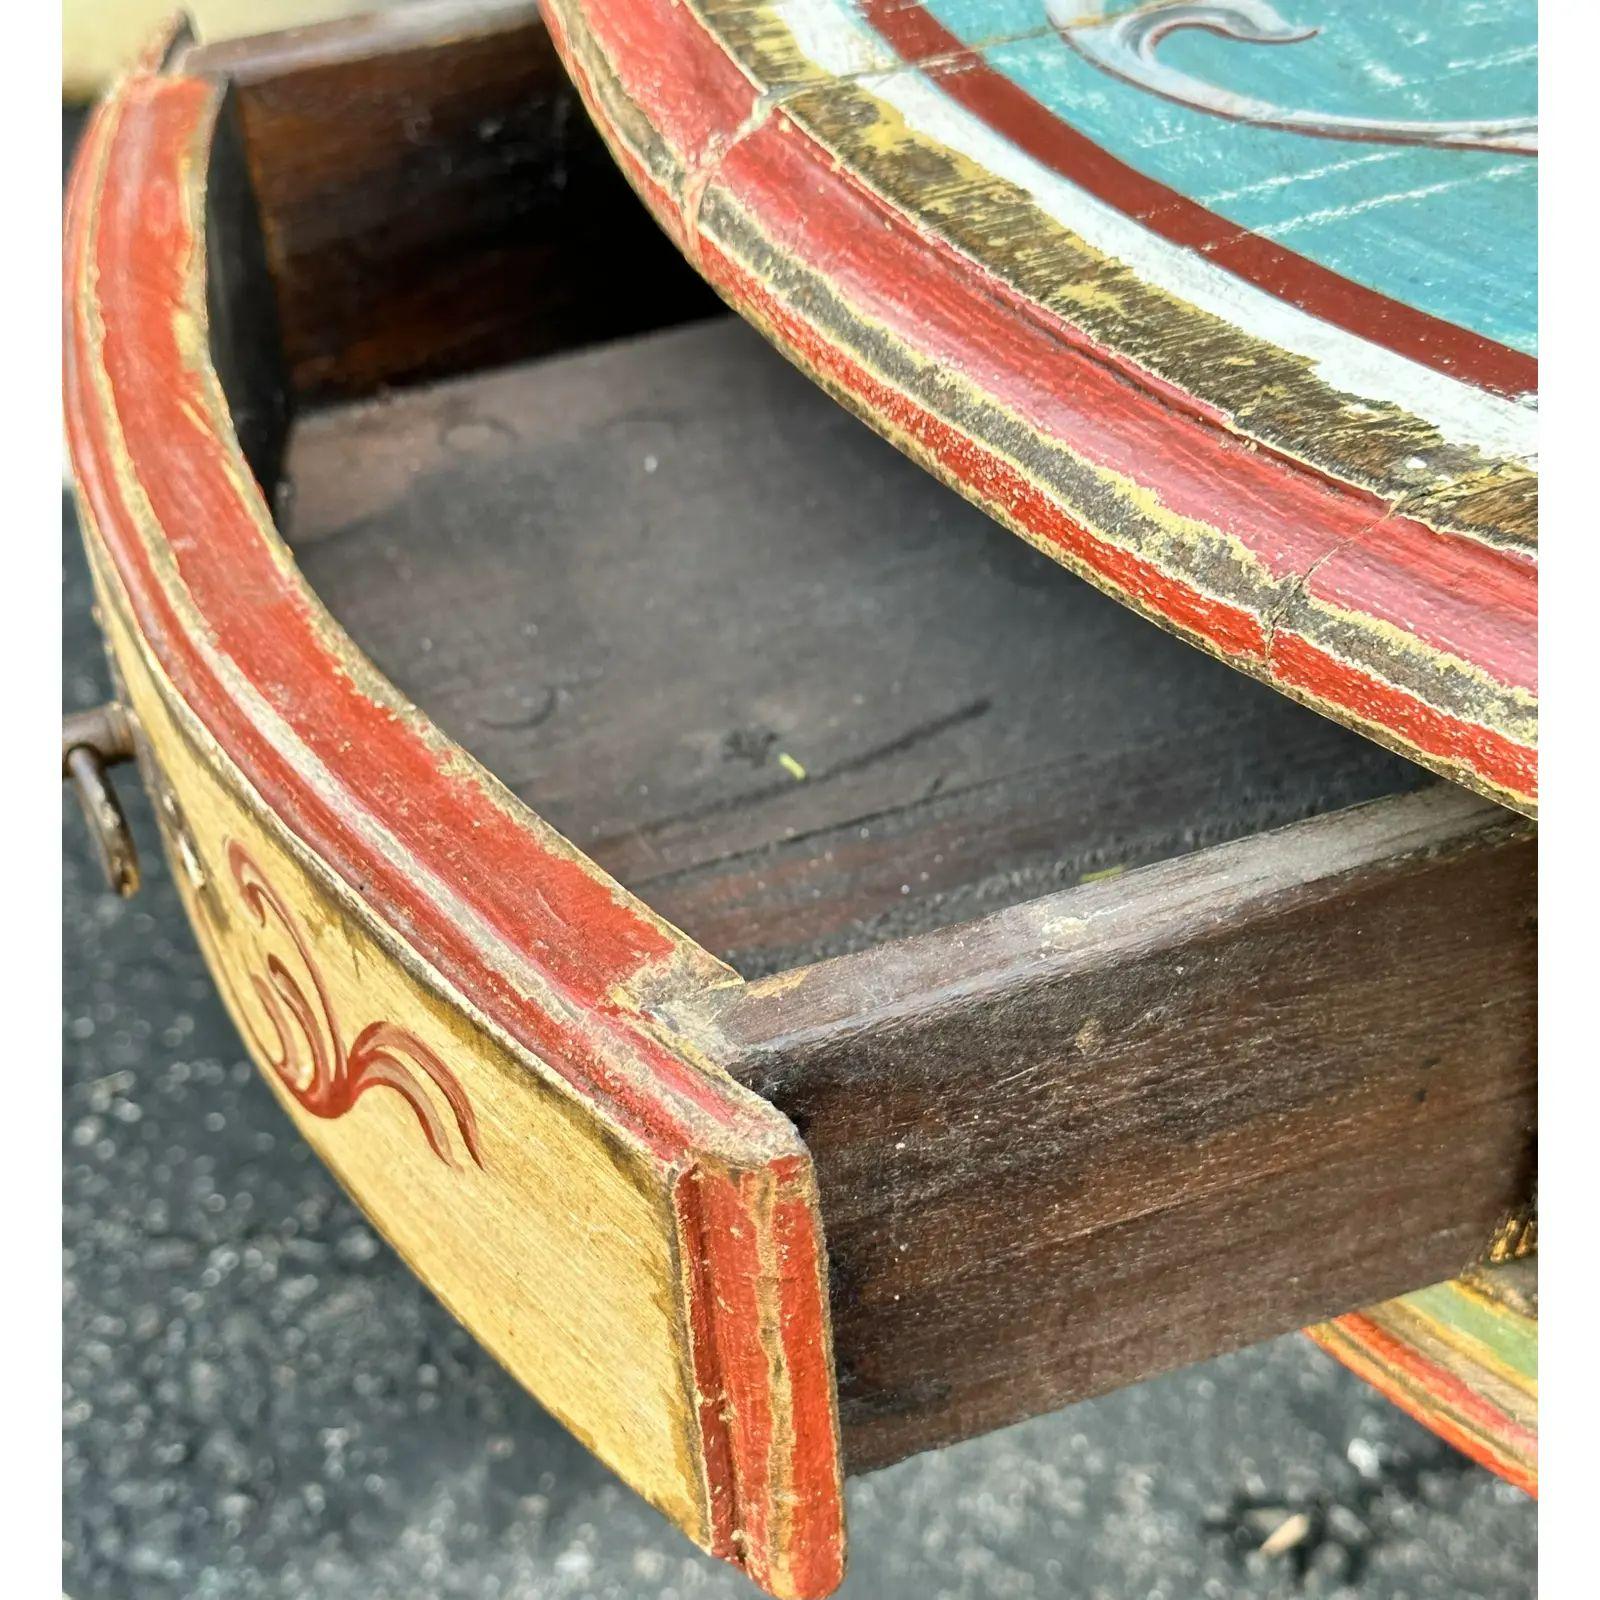 18C Style Round Italian Hand Painted Angel Coffee Table . It is beautifully hand painted and features a single drawer, and was made with recla8med wood by Equator Furniture.

Additional information: 
Materials: Paint, Wood
Color: Blue
Period: